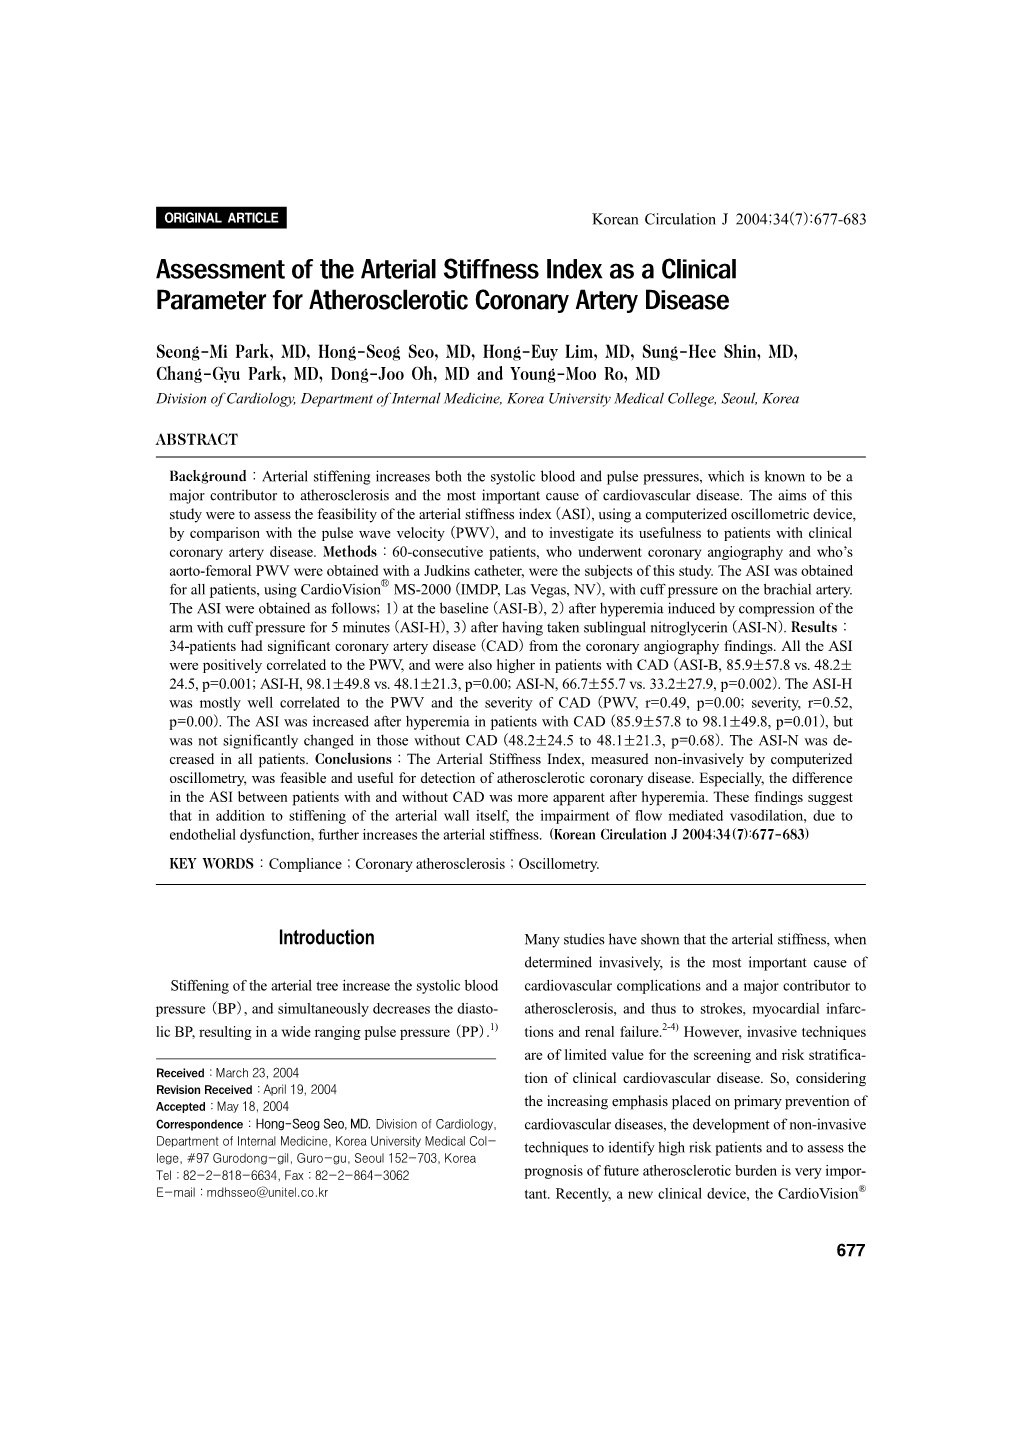 Assessment of the Arterial Stiffness Index As a Clinical Parameter for Atherosclerotic Coronary Artery Disease